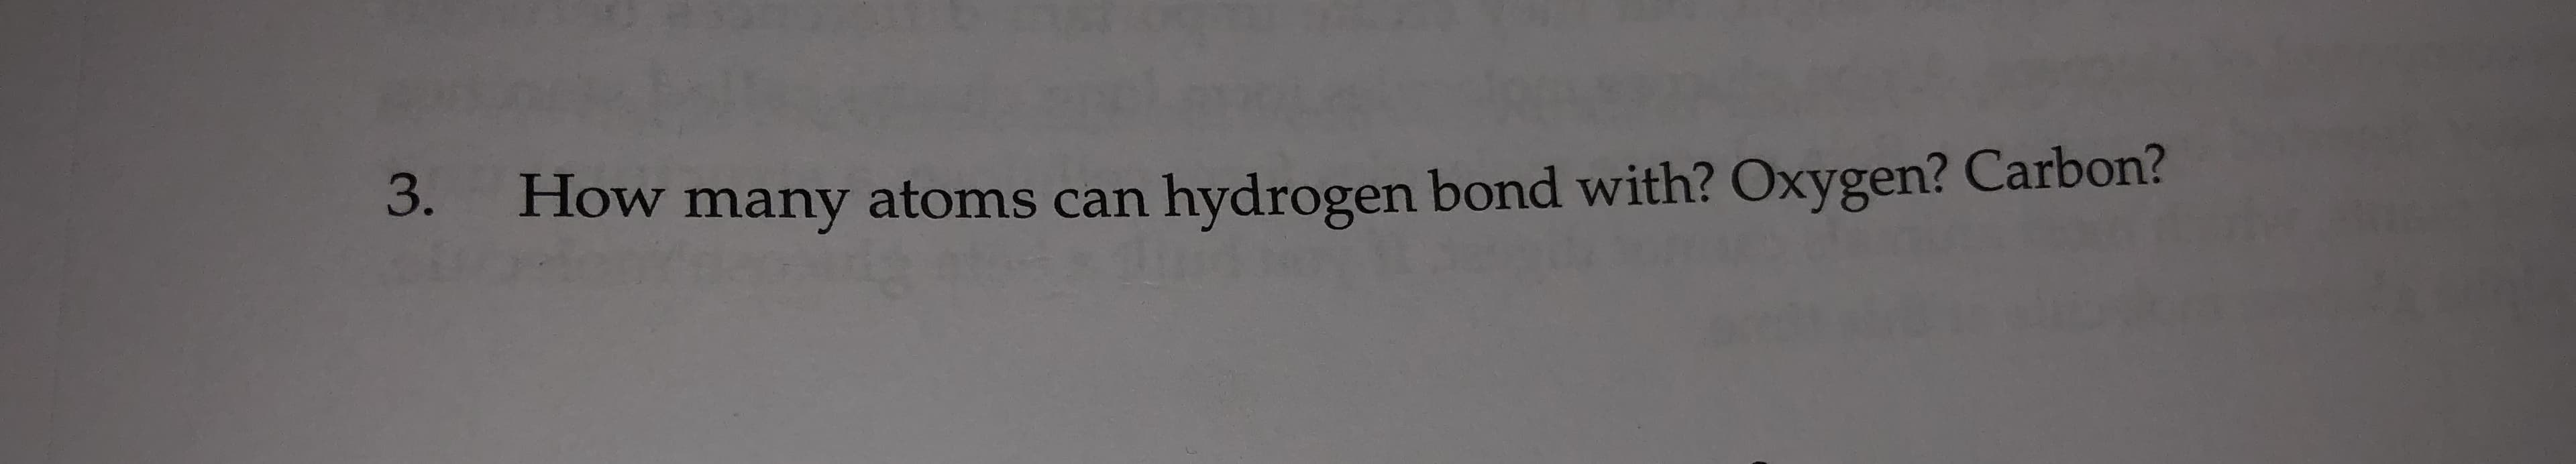 3.
How many atoms can hydrogen bond with? Oxygen? Carbon?
